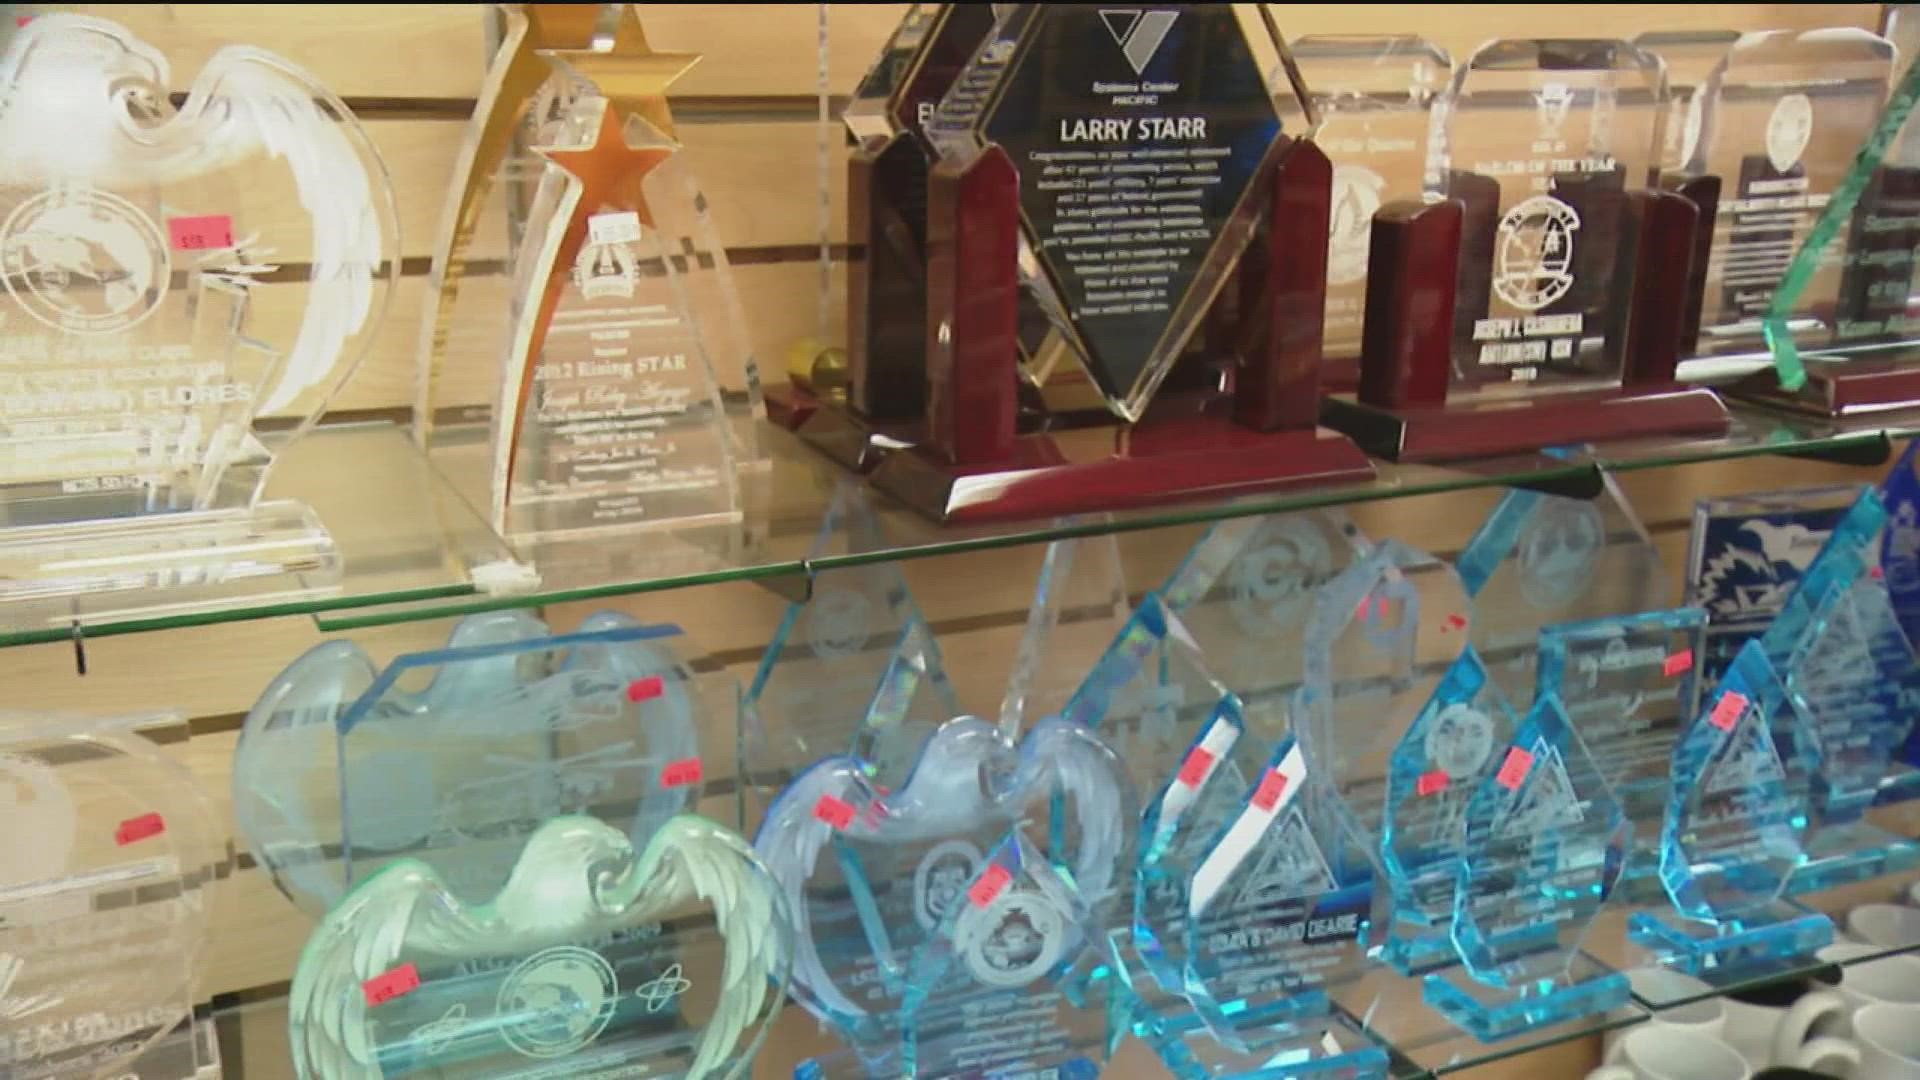 Award Master Inc. is a small, family-owned business near Naval Base San Diego that specializes in plaques and trophies.